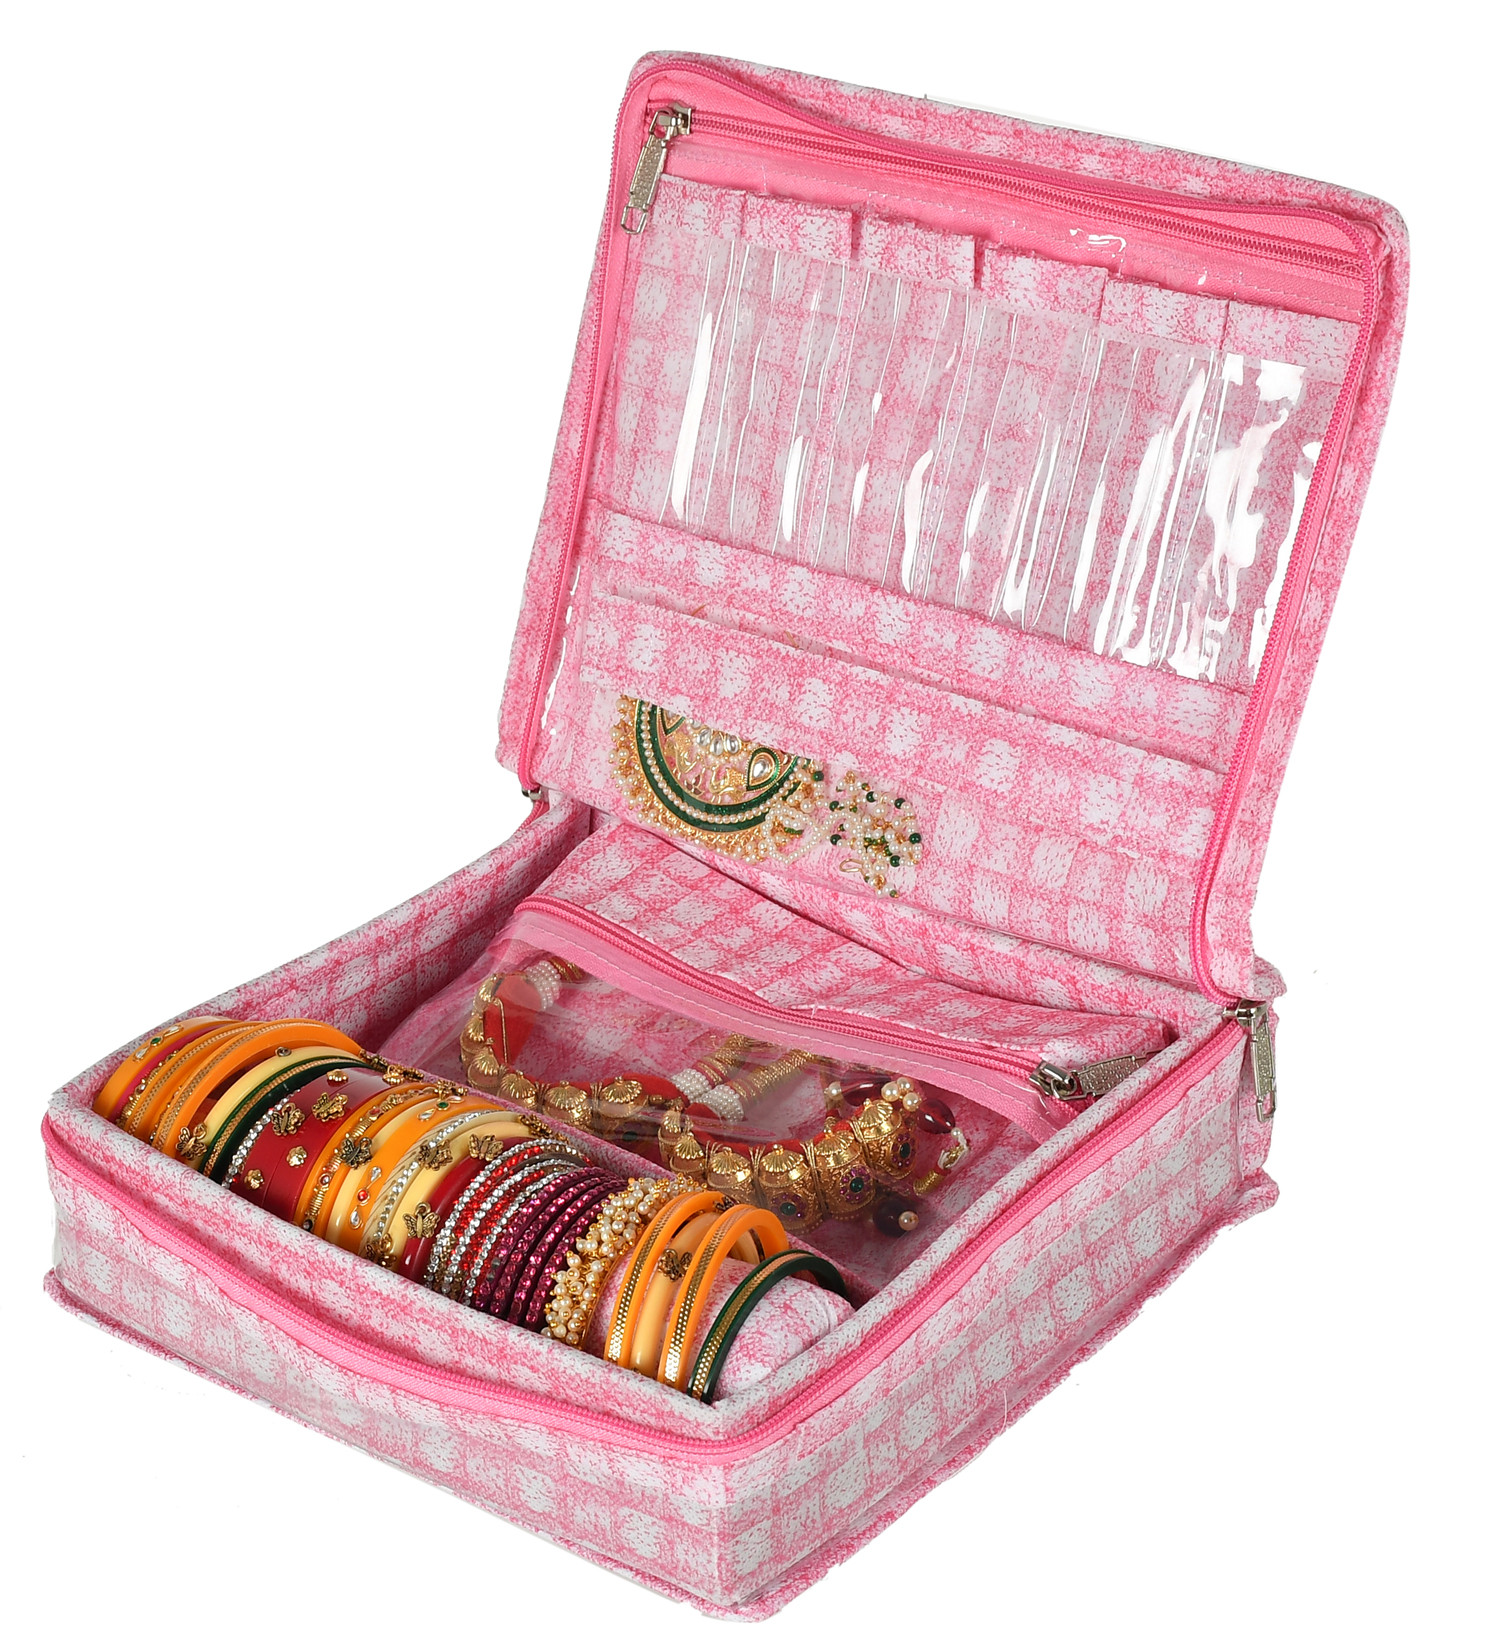 Kuber Industries Check Design Laminated PVC Jewellery Organizer With 4 Transparent Pouches & 1 Bangle/Watch Rod For Keeps Your Jewellery,Earrings, Necklaces Organized And Secure (Pink)-HS_38_KUBMART21277